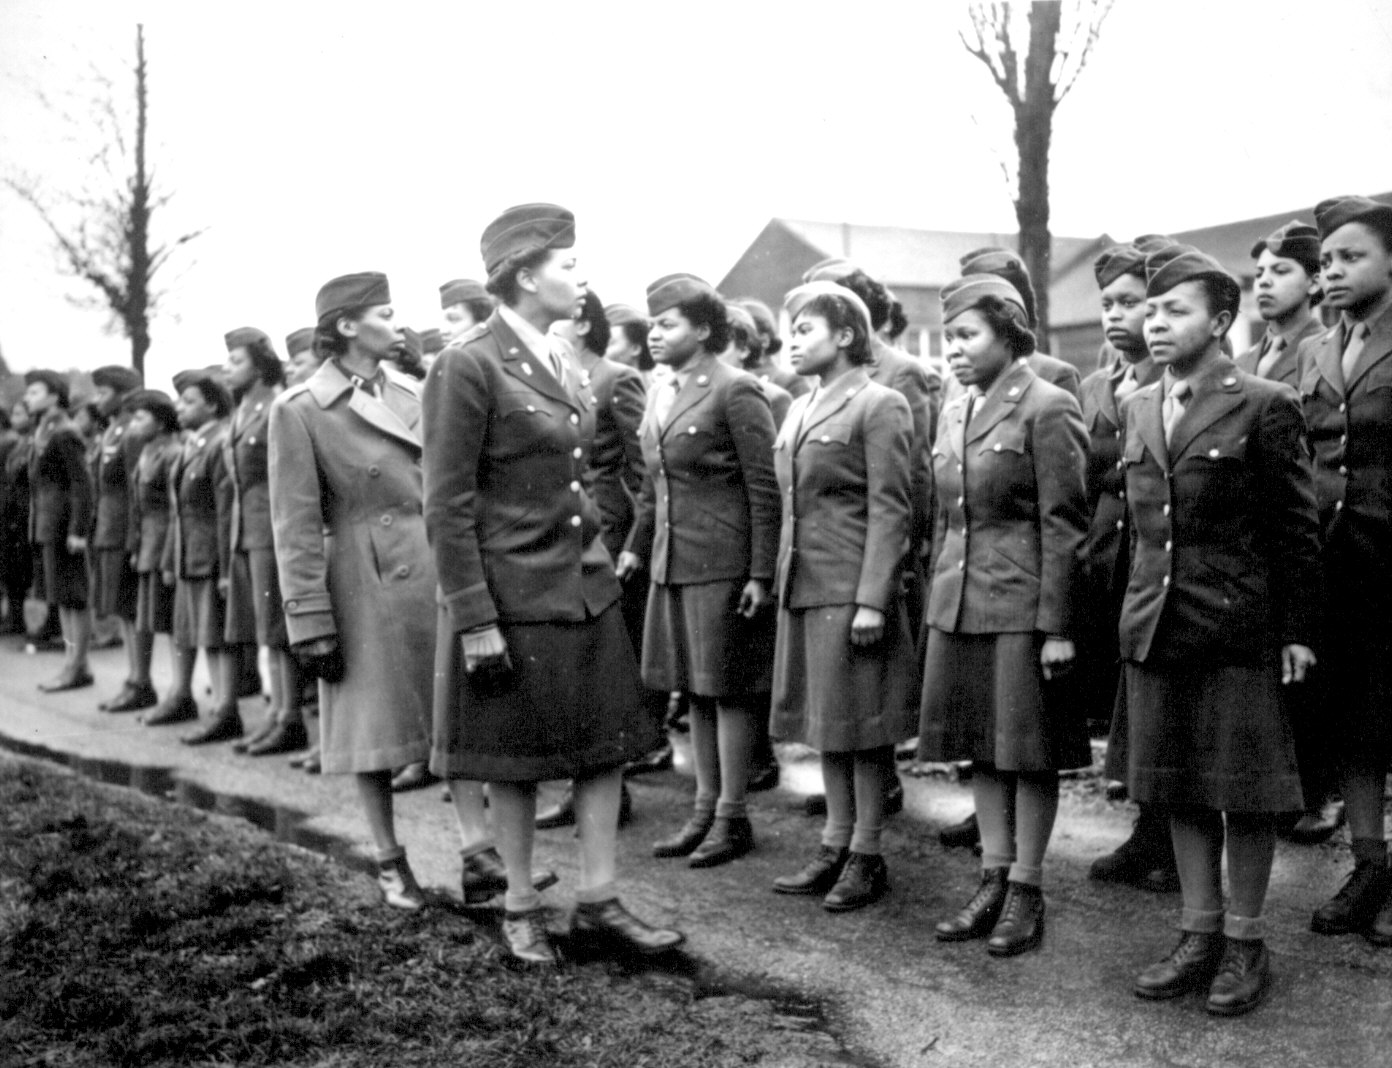 WAC Major Charity E. Adams and Captain Abbie N. Campbell inspecting members of the 6888th Central Postal Directory Battalion, England, 15 Feb 1945 (US National Archives: 111-SC-20079)